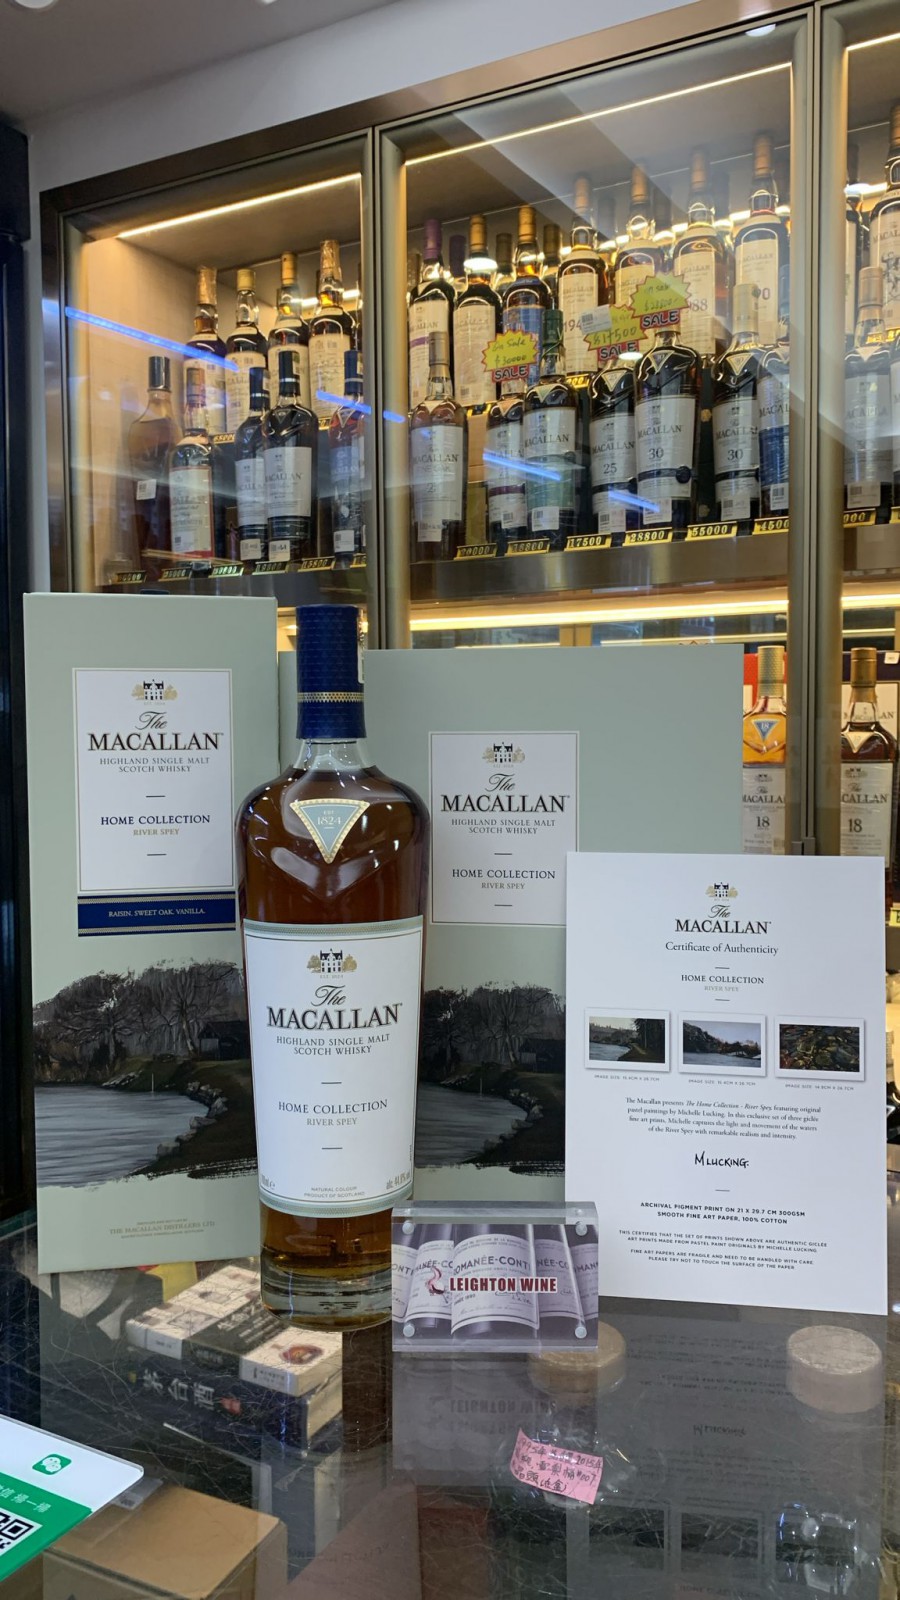 Macallan Home Collection – River Spey